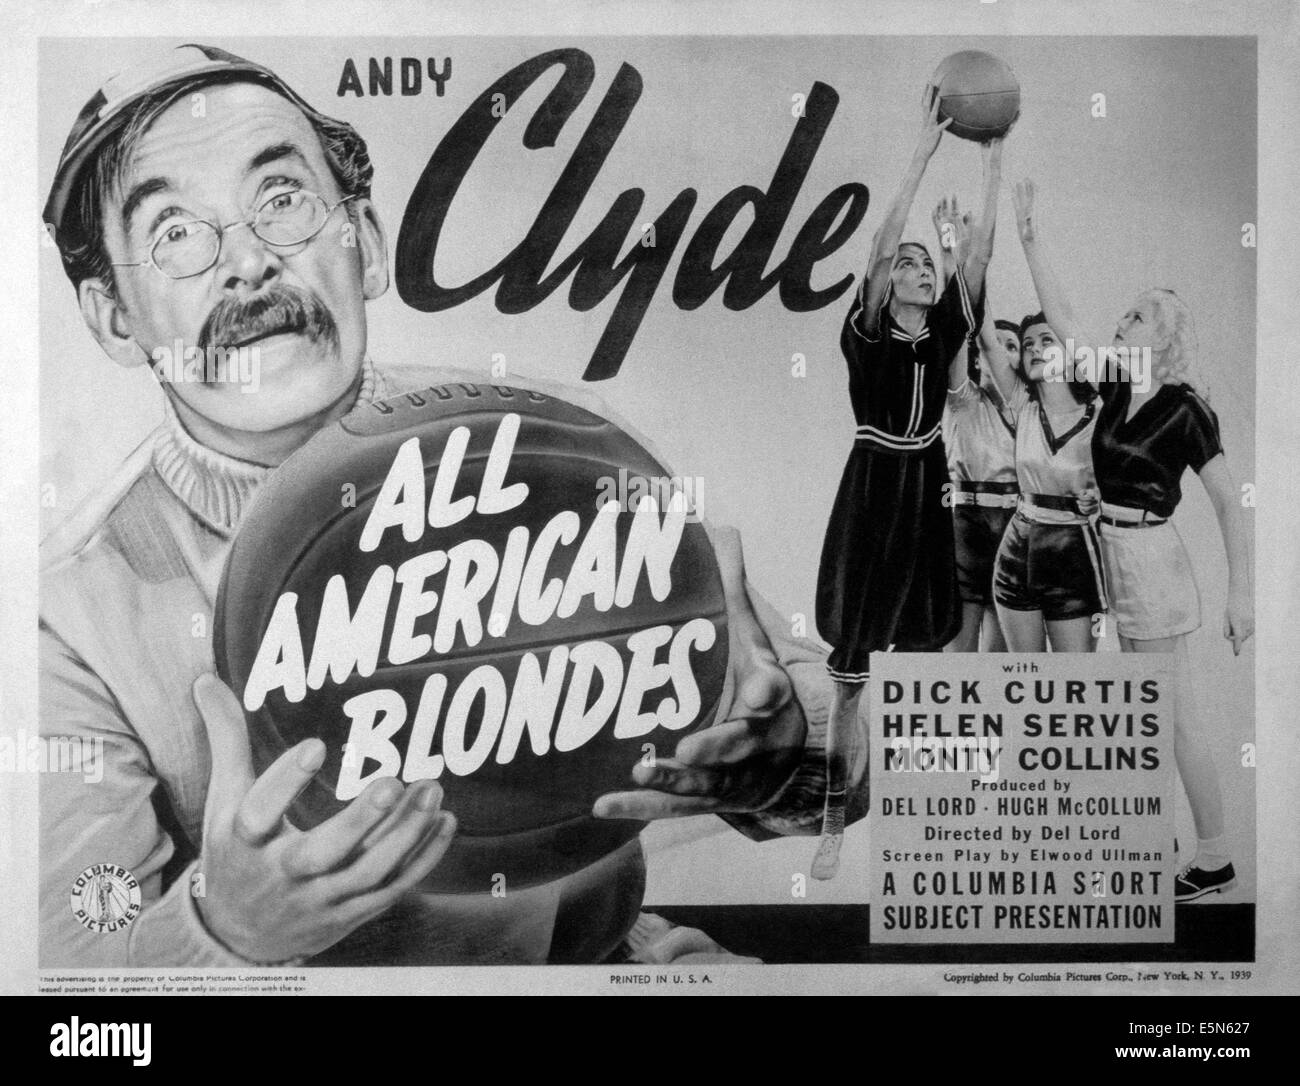 ALL-AMERICAN BLONDES, Andy Clyde (left), 1939 Stock Photo